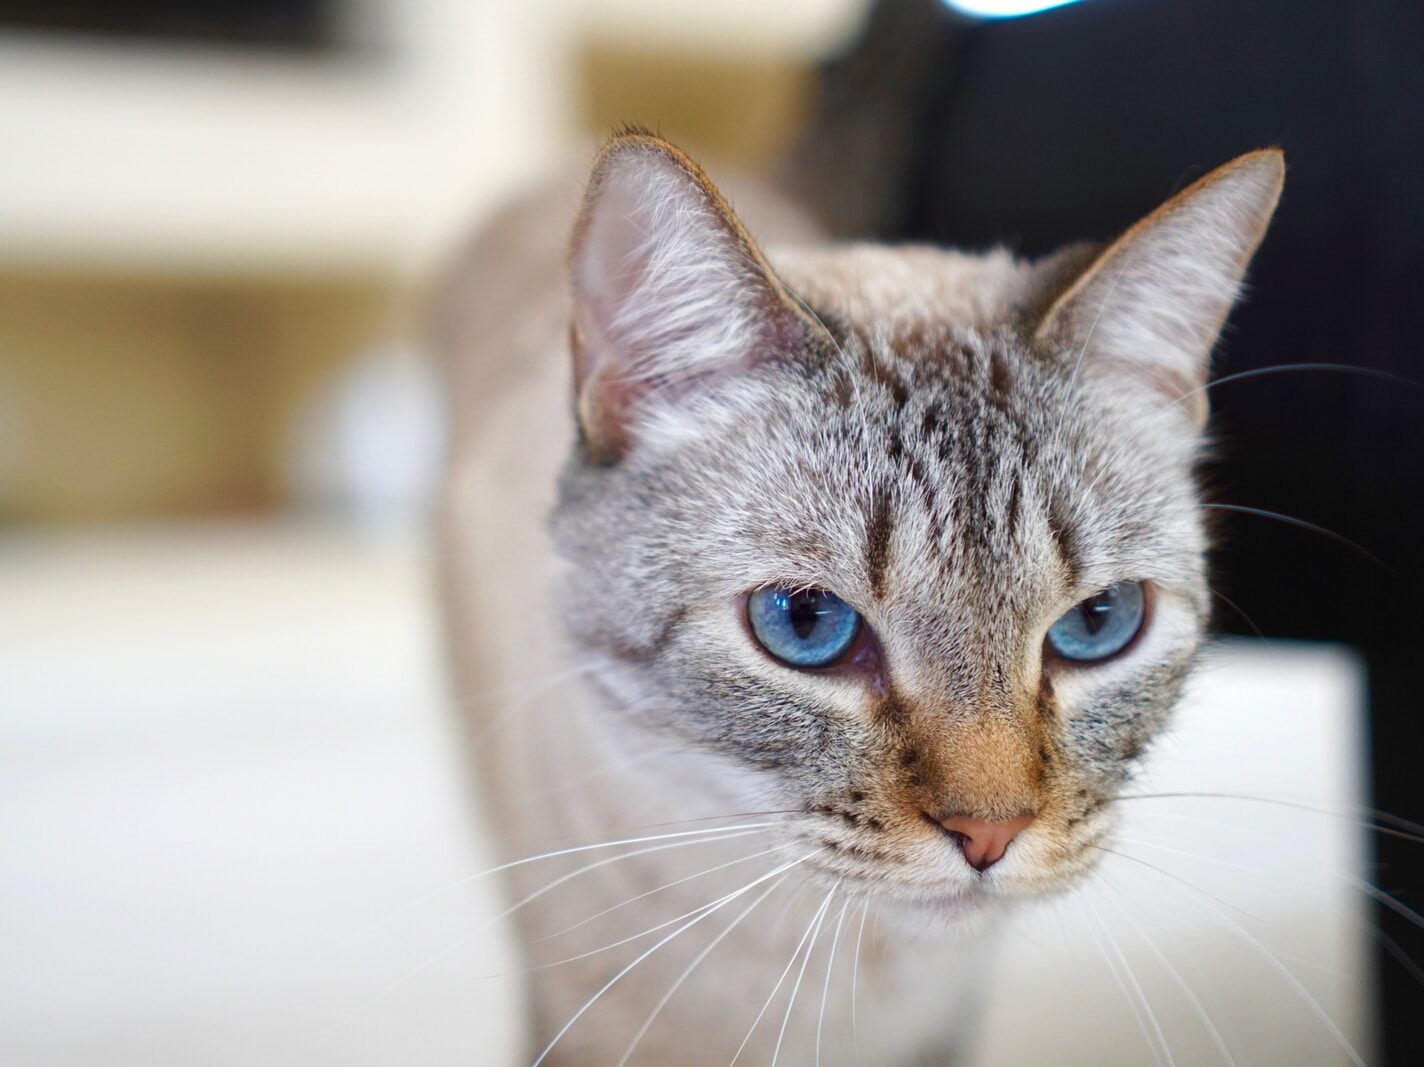 shallow focus photography of silver Tabby cat